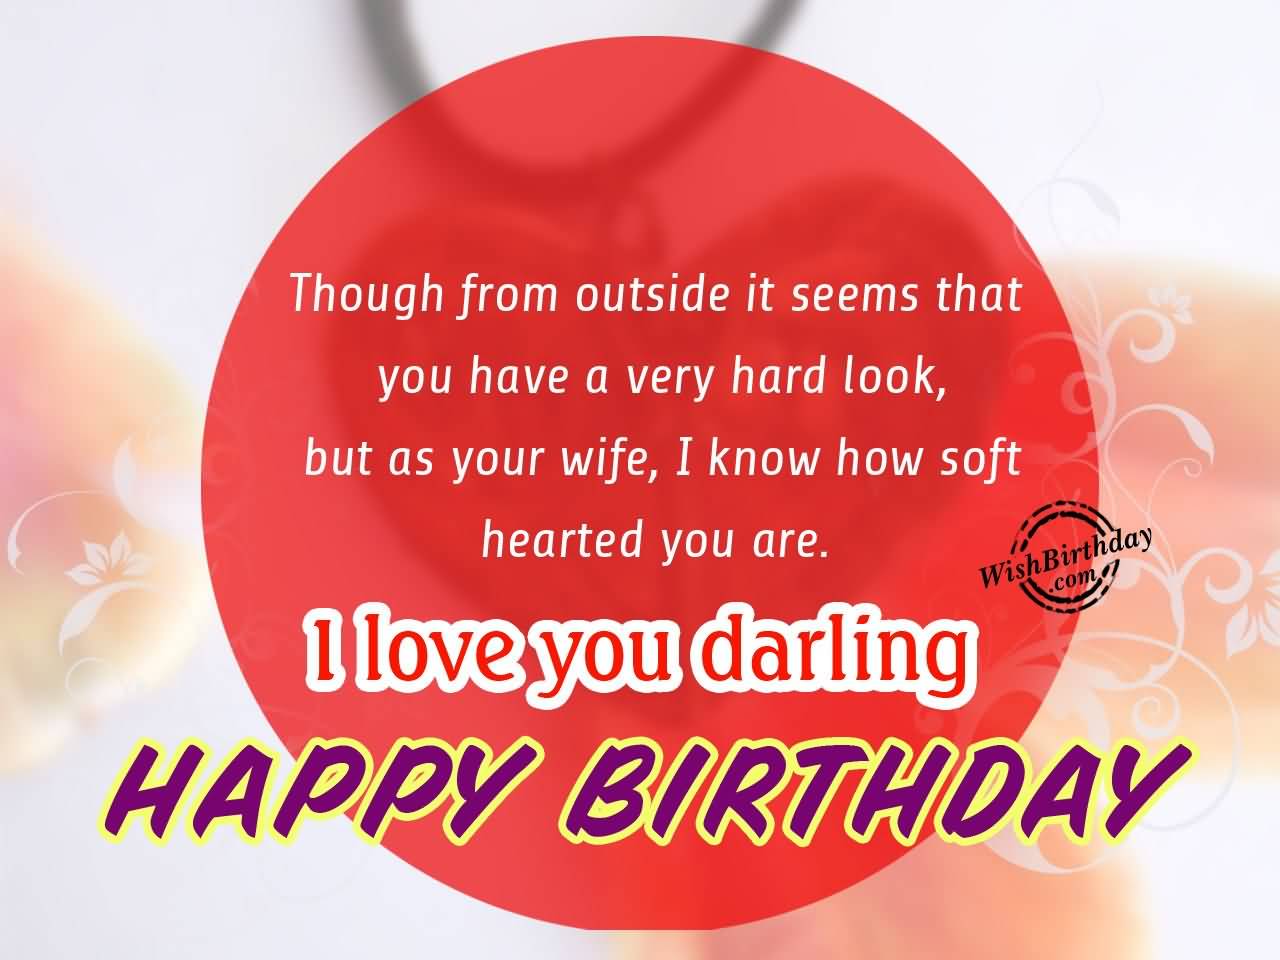 Happy Birthday Wishes For Husband Images Free Download Though From Outside It Seems